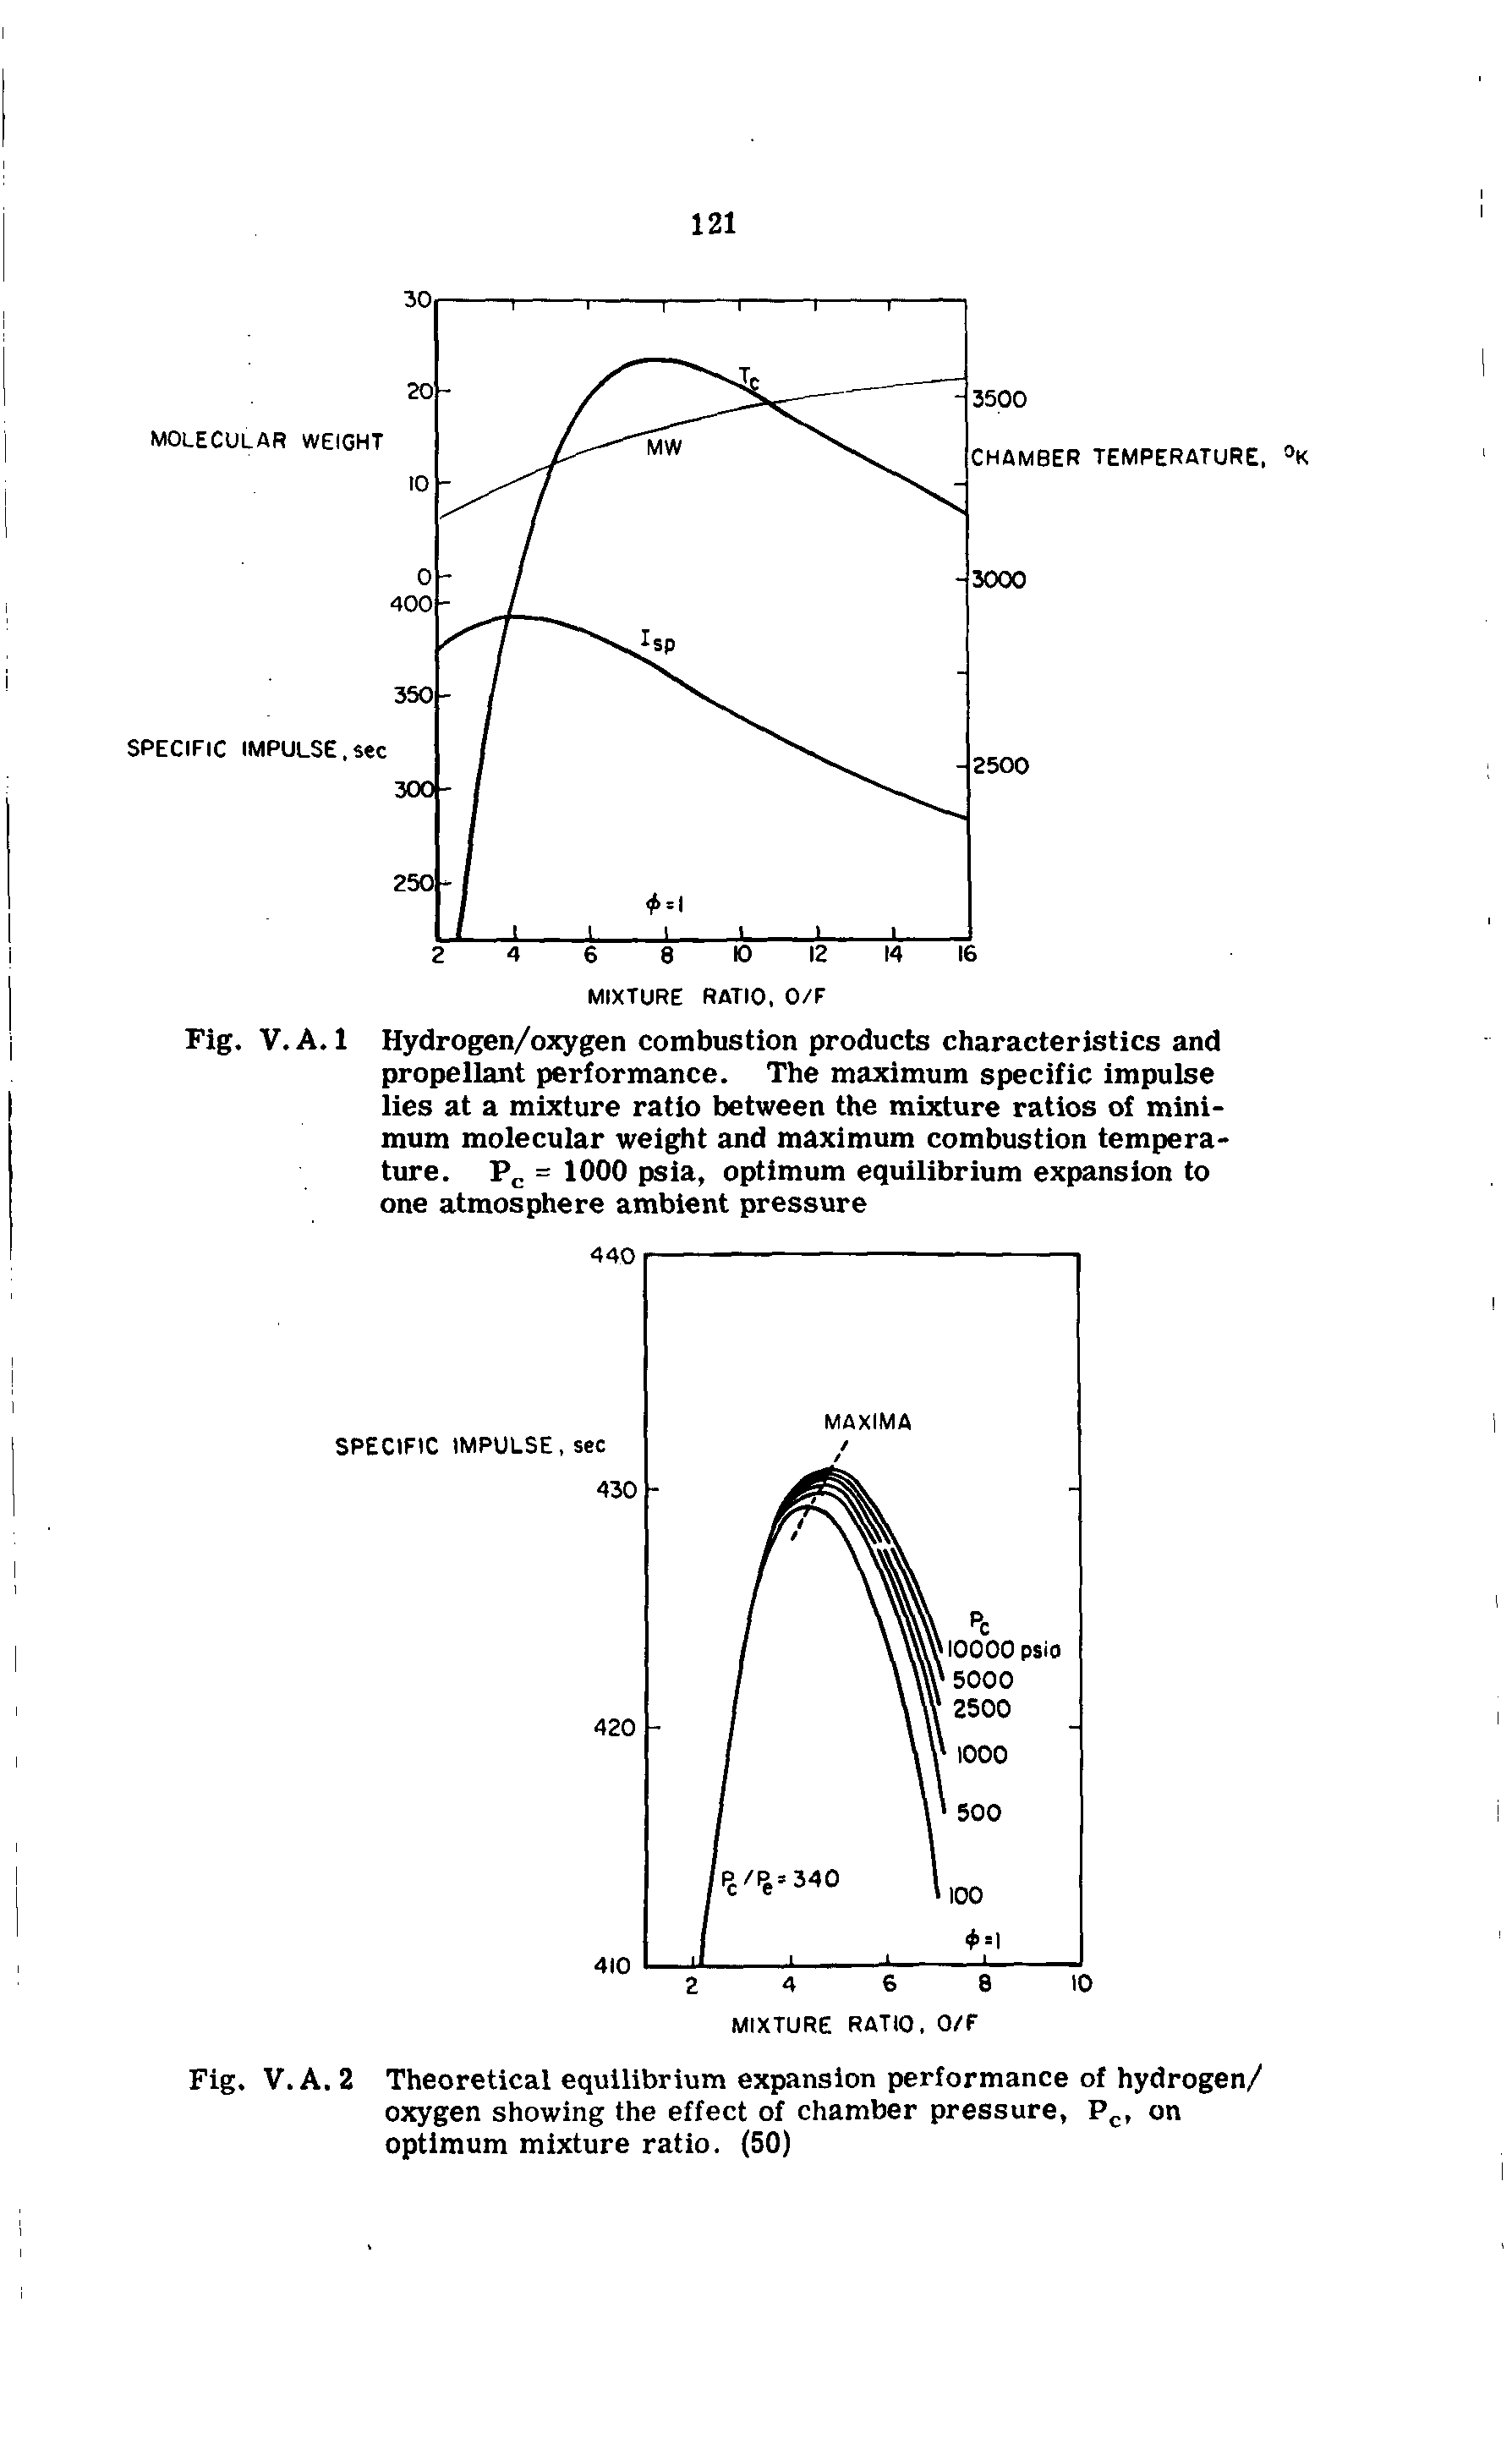 Fig. V.A. 1 Hydrogen/oxygen combustion products characteristics and propellant performance. The maximum specific impulse lies at a mixture ratio between the mixture ratios of minimum molecular weight and maximum combustion temperature. Pc = 1000 psia, optimum equilibrium expansion to one atmosphere ambient pressure...